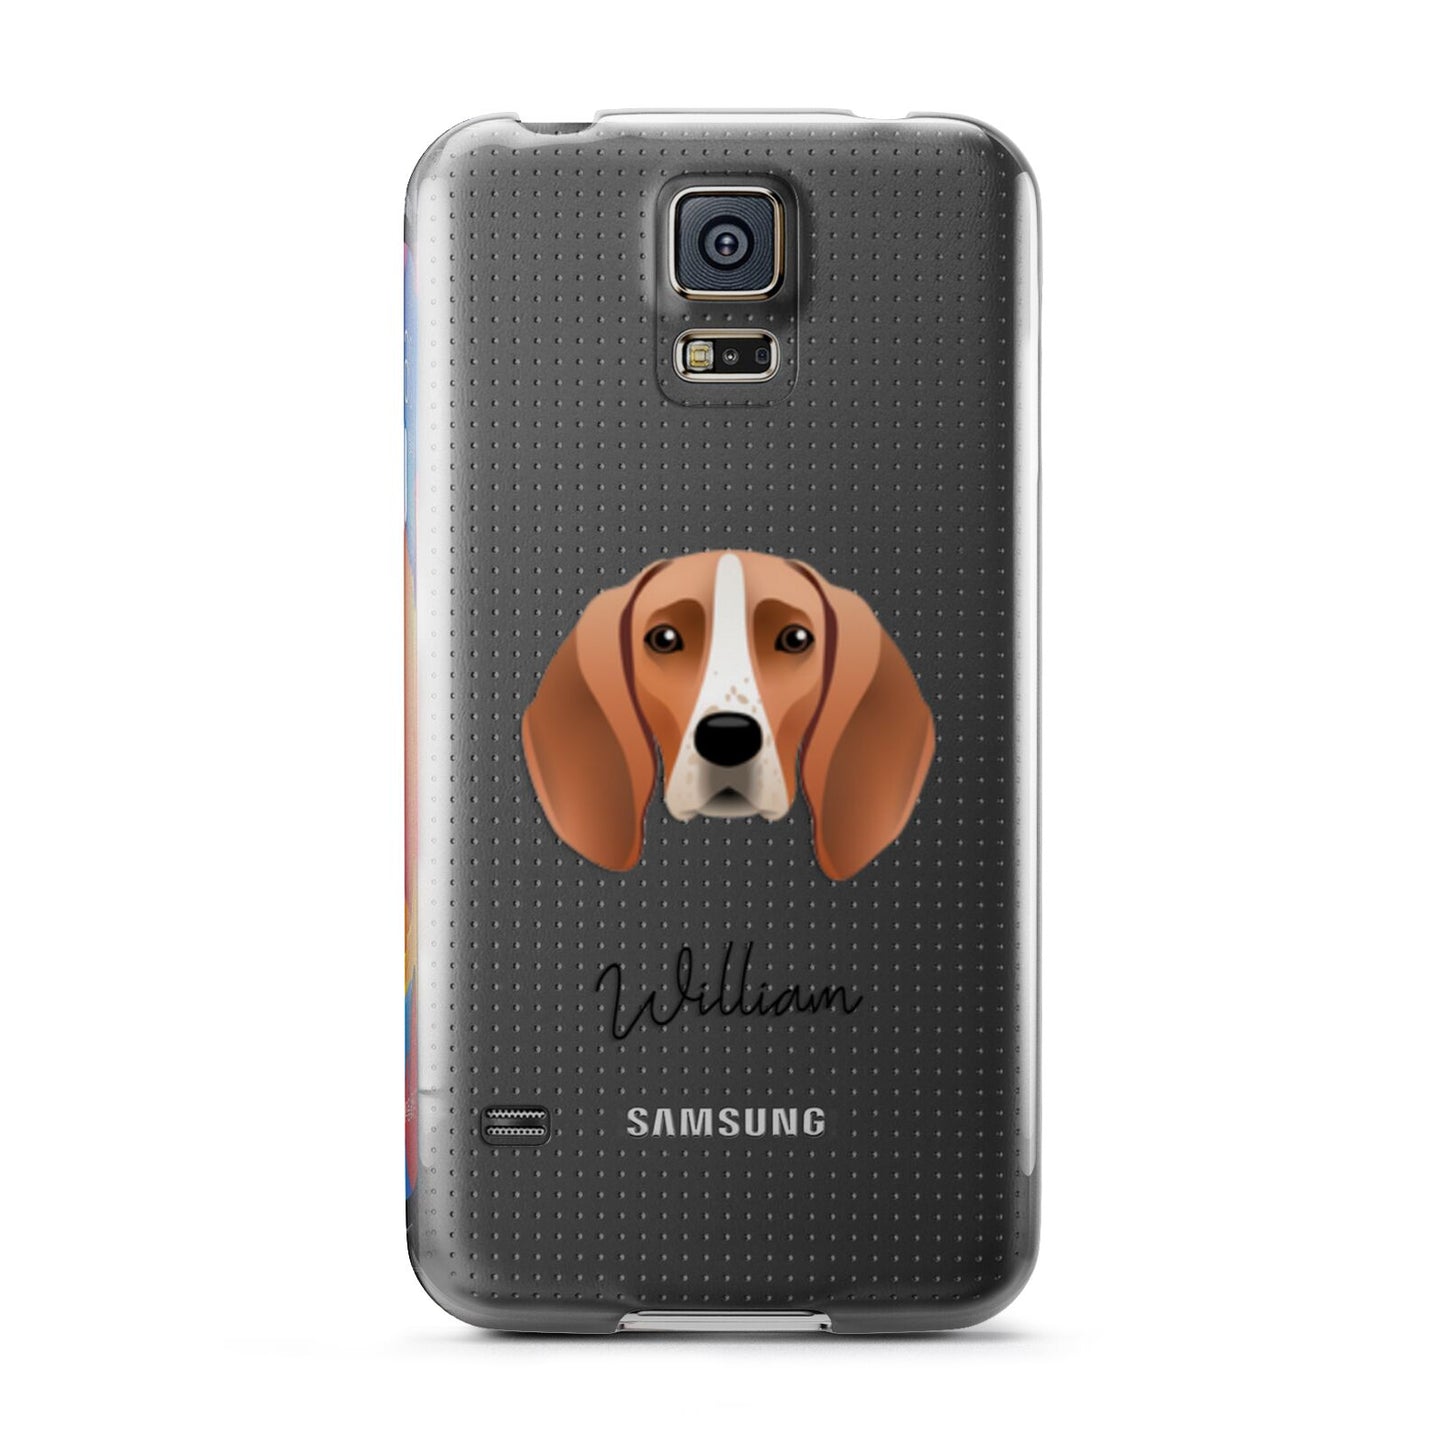 Foxhound Personalised Samsung Galaxy S5 Case